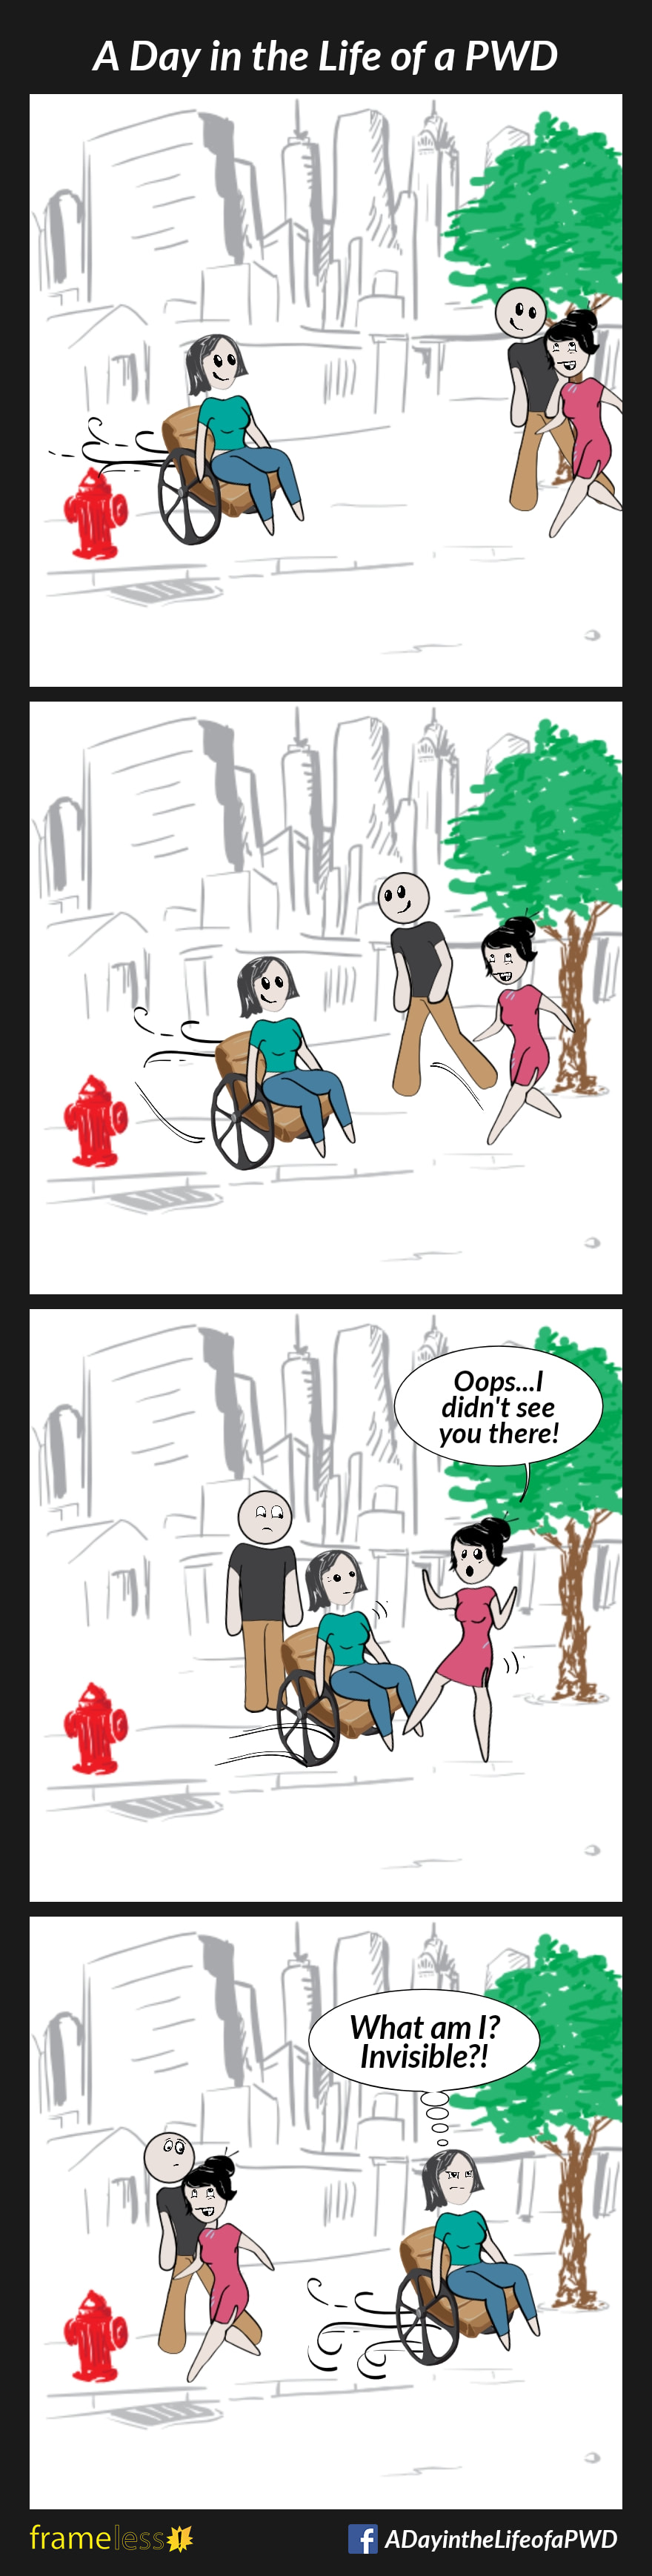 COMIC STRIP 
A Day in the Life of a PWD (Person With a Disability) 

Frame 1:
A wheelchair user is traveling down a sidewalk. A man and woman are walking towards her.

Frame 2:
As the wheelchair user approaches, the man steps to the side but the woman doesn't. 

Frame 3:
The woman almost walks into the wheelchair user, and is startled. 
WOMAN: Oops...I didn't see you there!

Frame 4:
They all continue on their ways.
WHEELCHAIR USER (thinking): 
What am I? Invisible?!